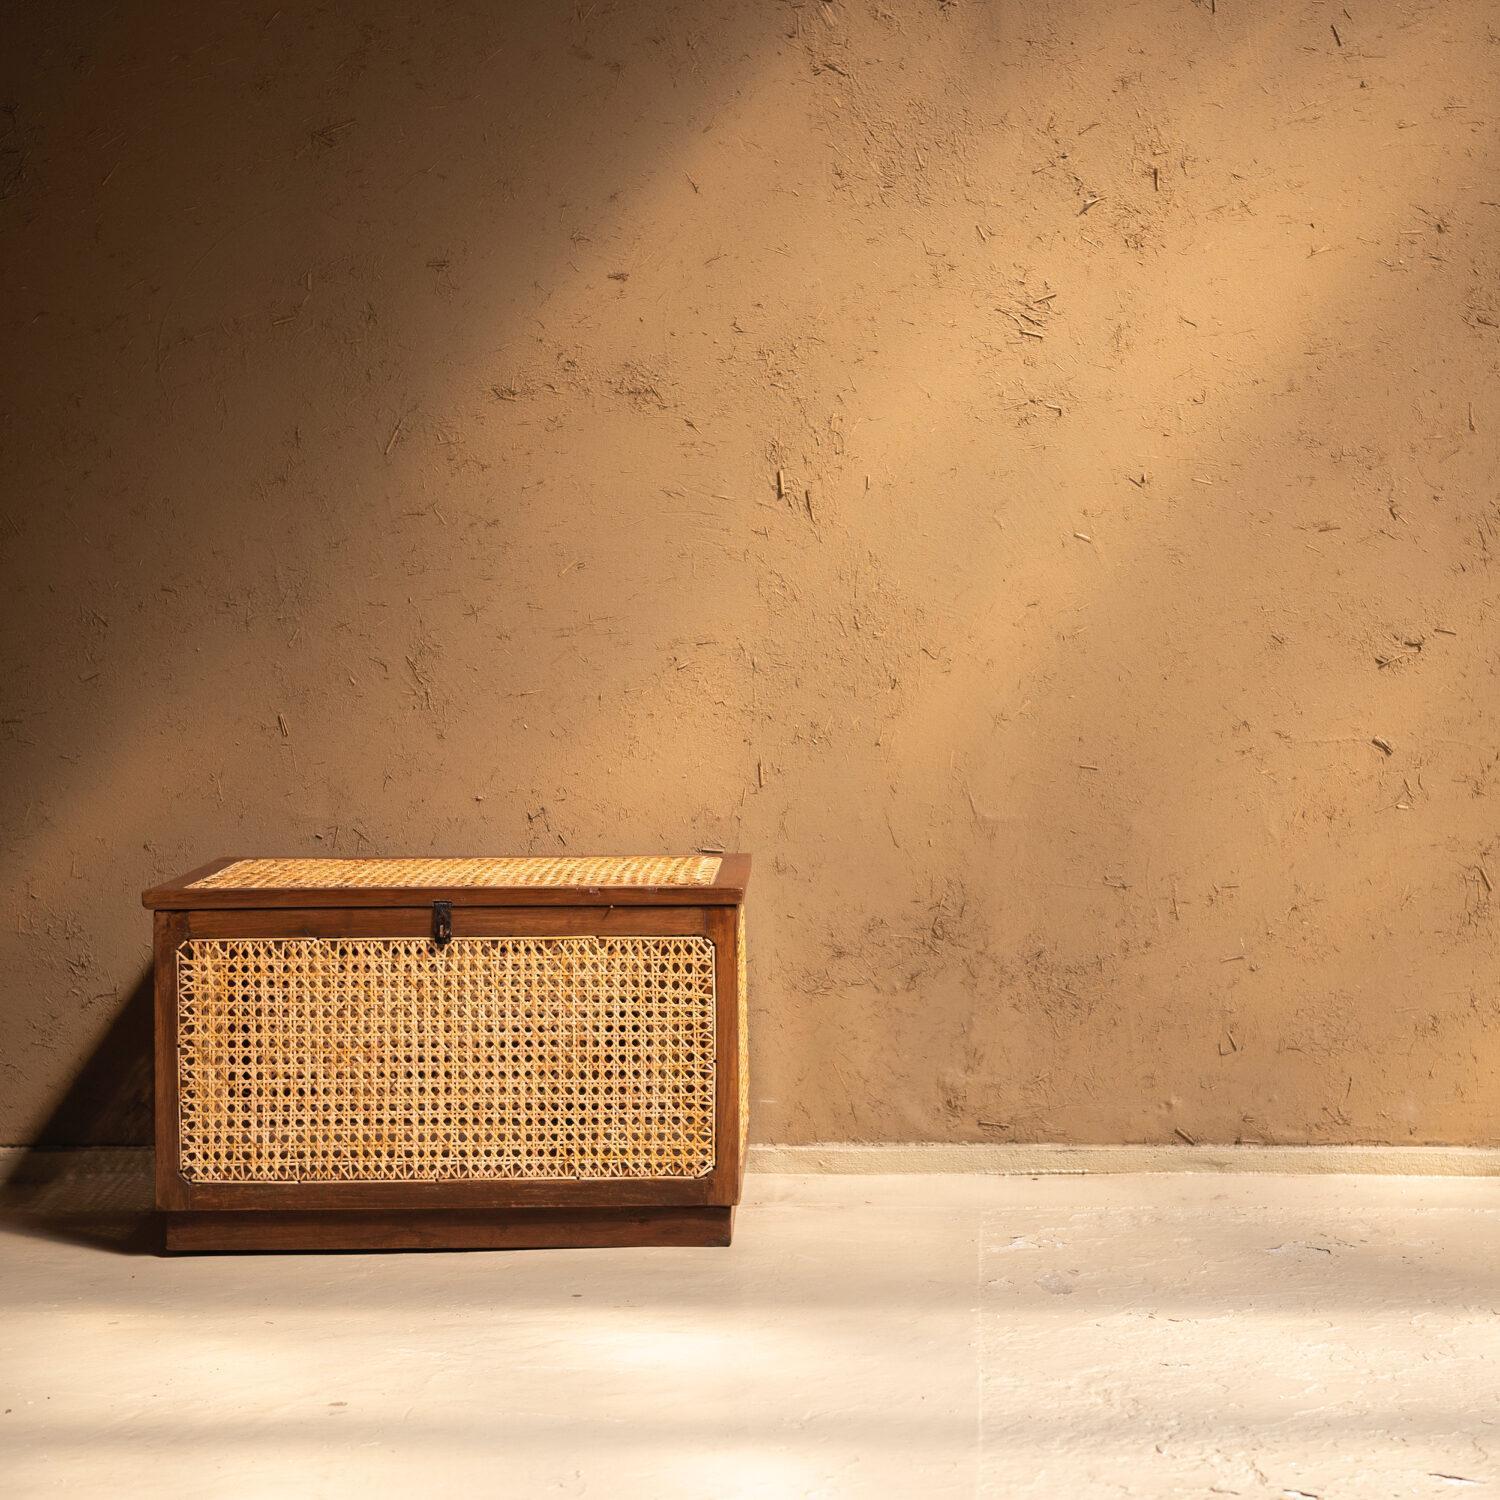 Linen chest designed by Pierre Jeanneret for the M.L.A. Flats building, Chandigarh. Also called “dirty linen basket